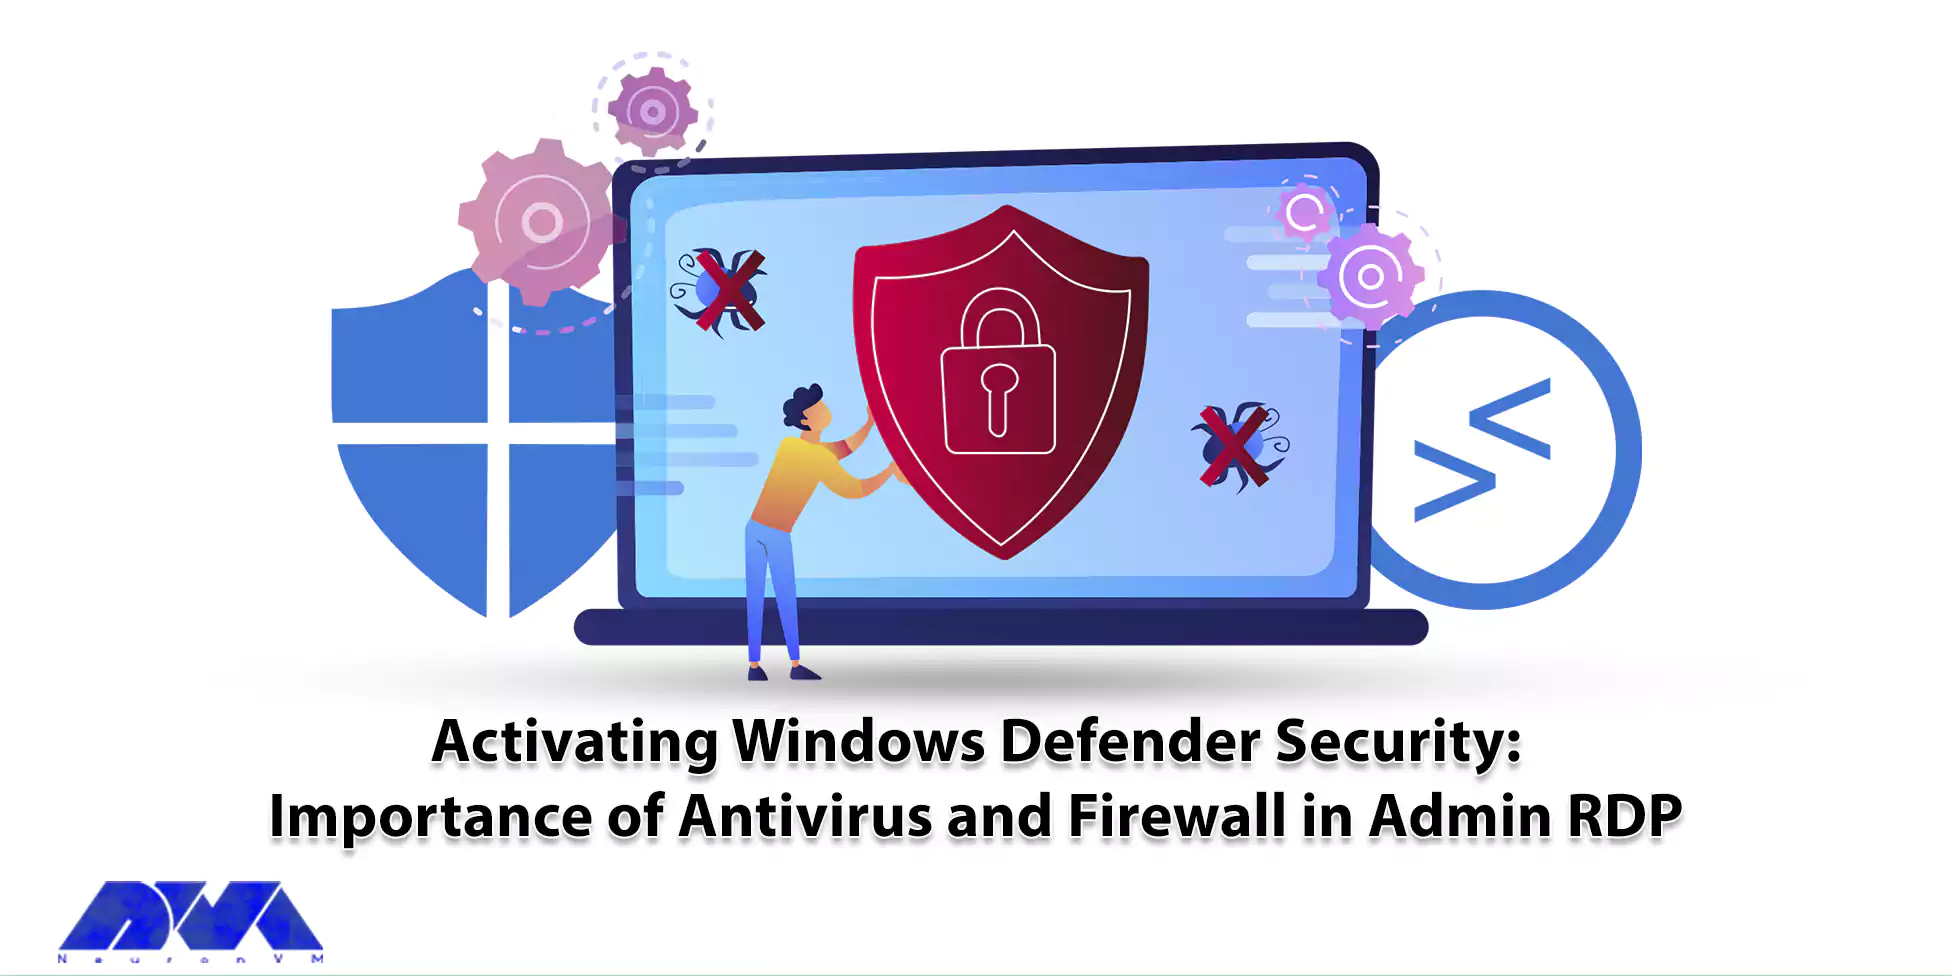 Activating Windows Defender Security Importance of Antivirus and Firewall in Admin RDP (1)